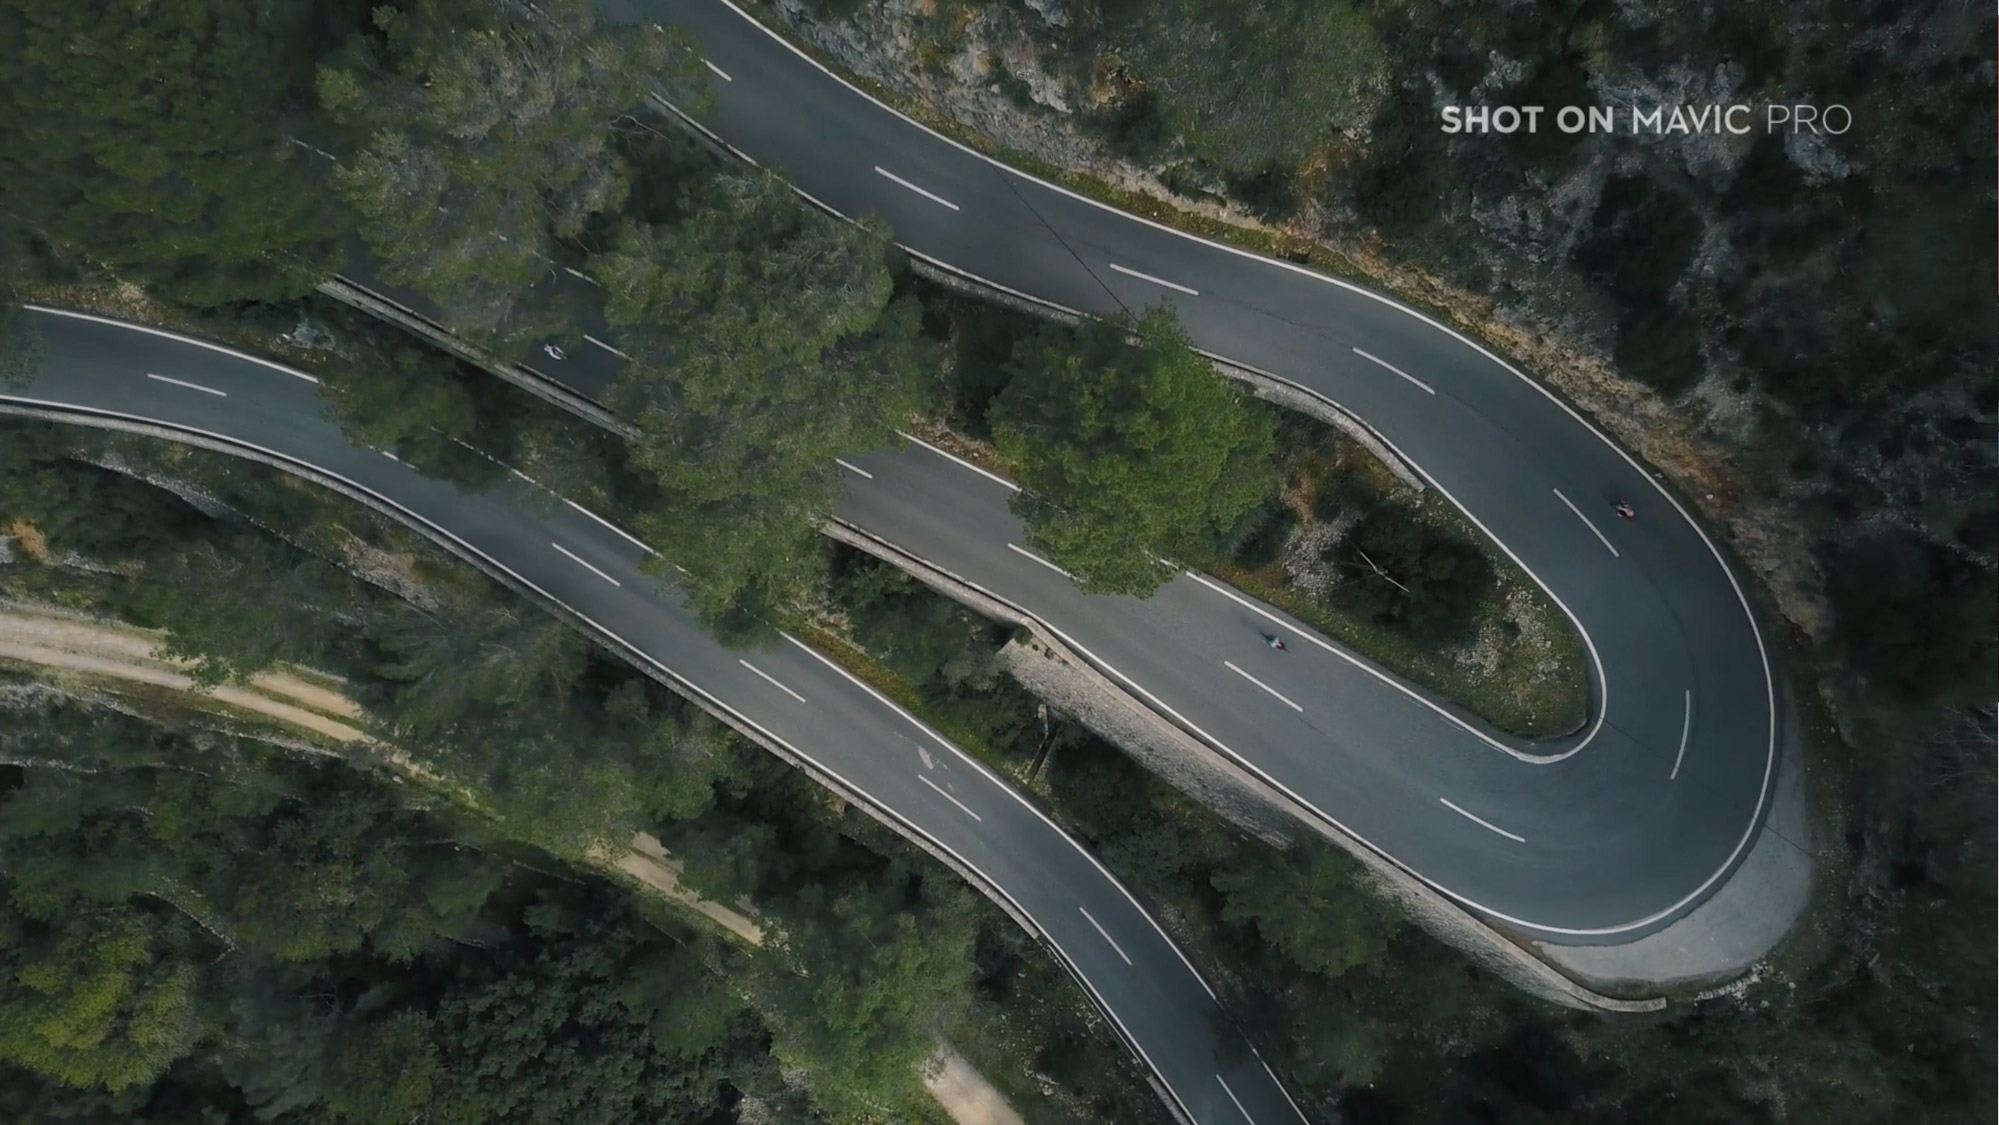 Hairpins provide an ideal opportunity for a bird's eye angle.